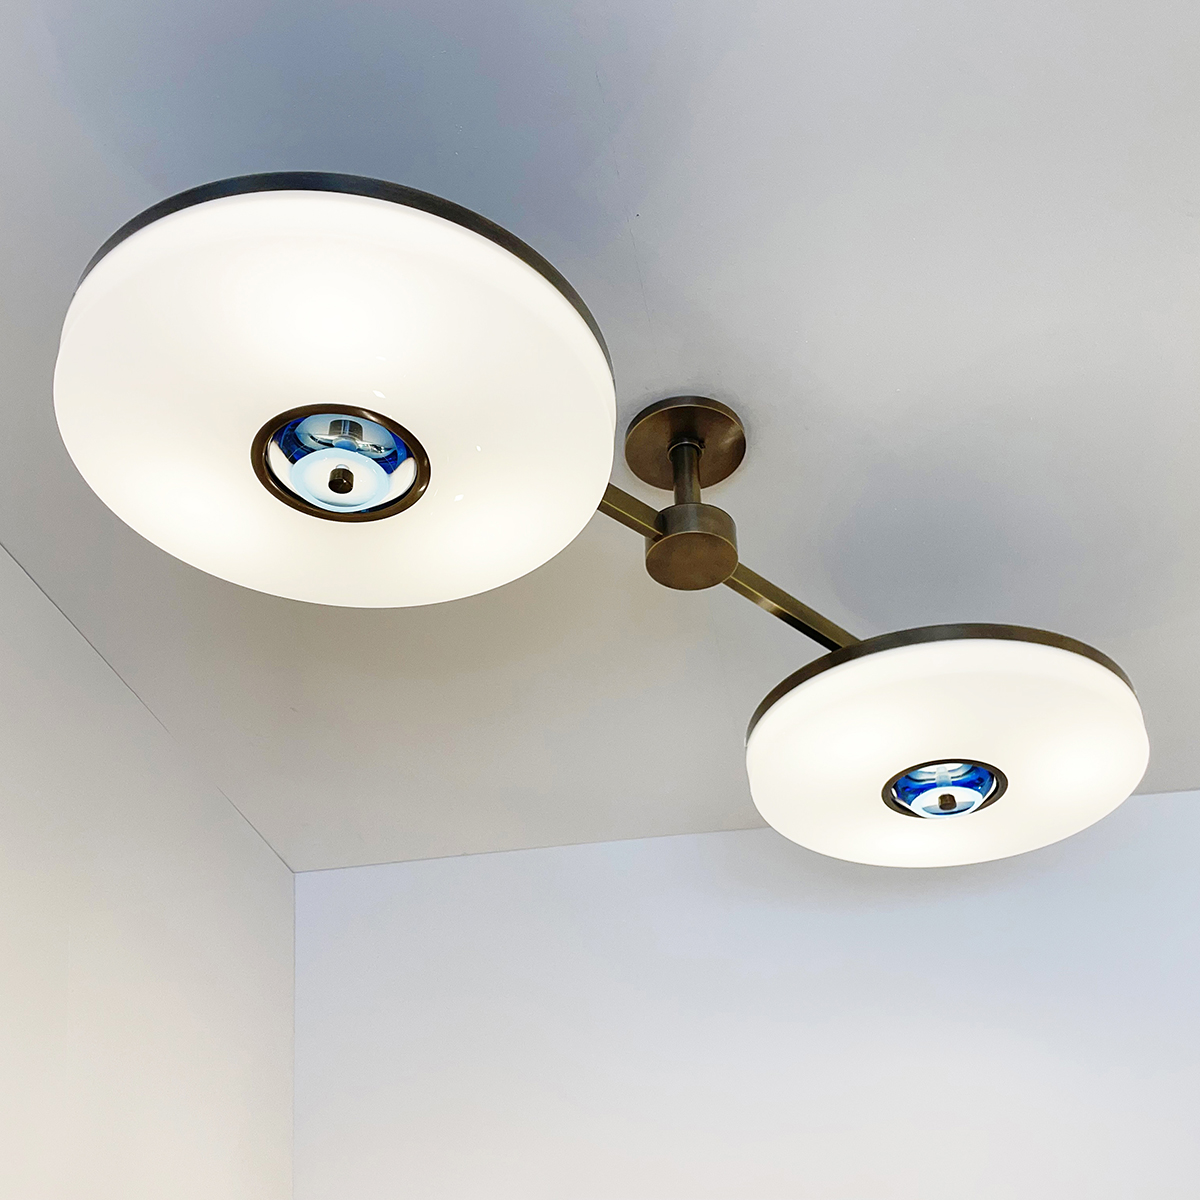 Iris N. 2 Ceiling Light by form A